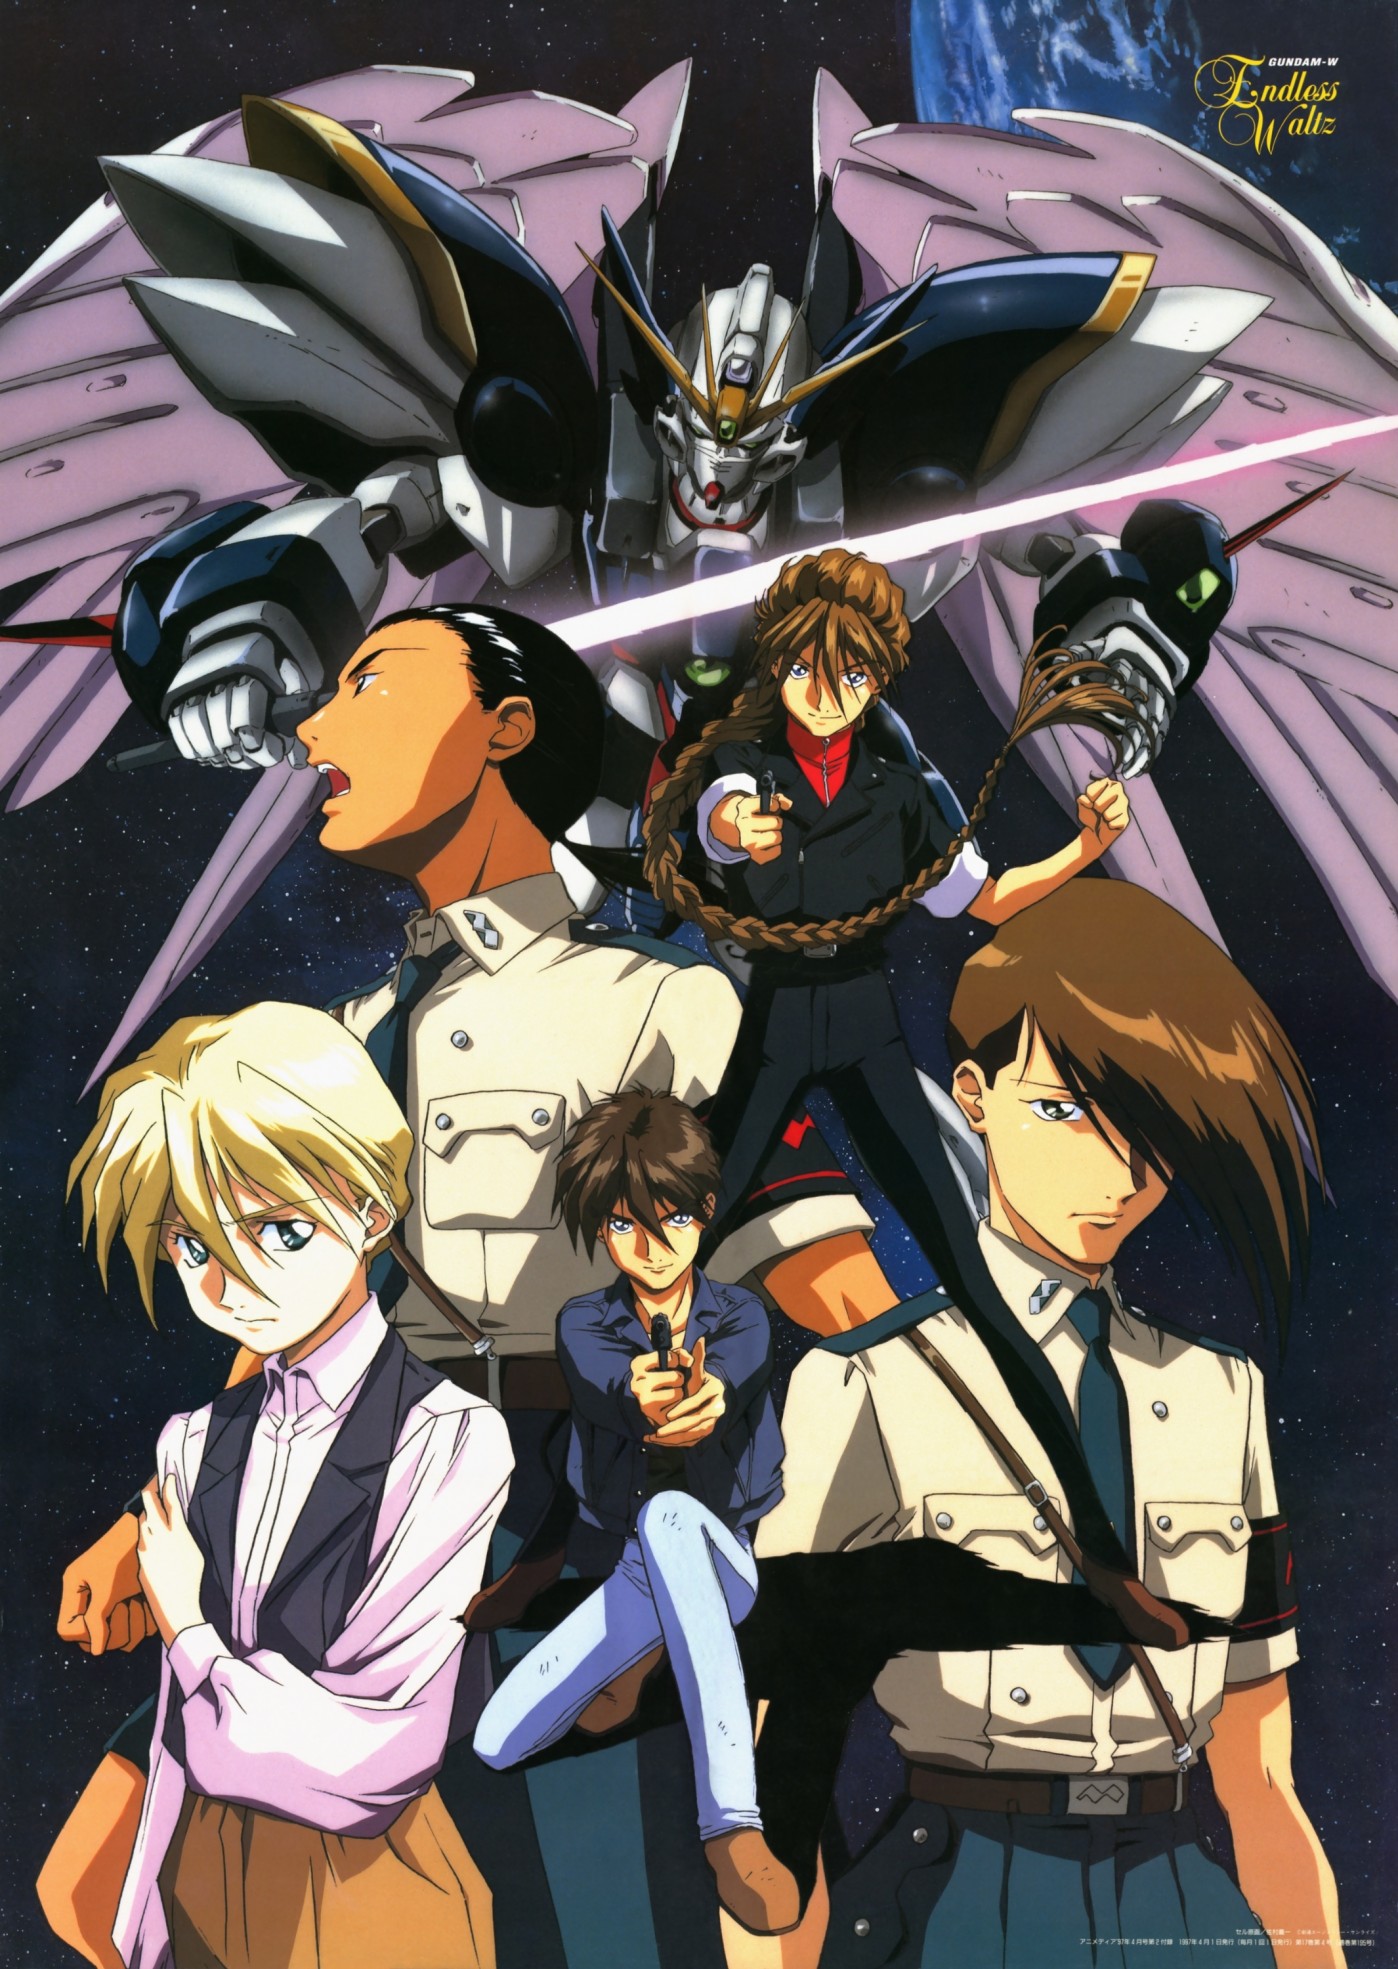 High Resolution Wallpaper | Mobile Suit Gundam Wing 1398x1969 px